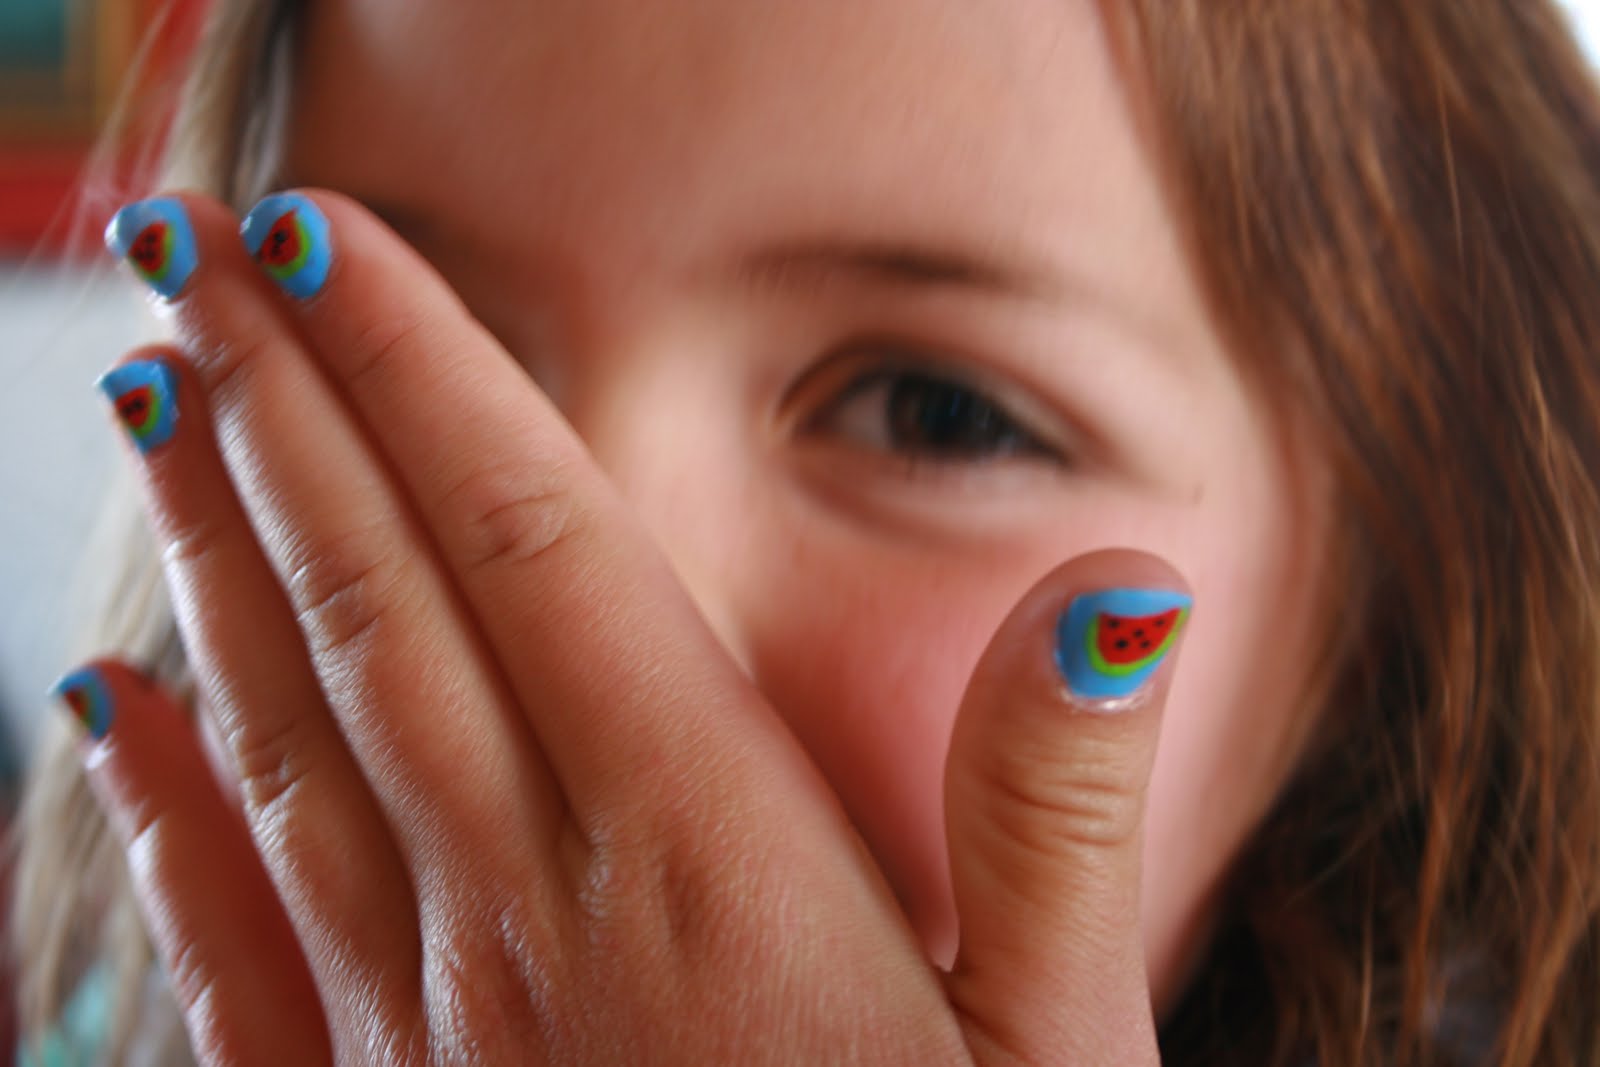 How to Paint Fun Designs on Fingernails (she: Cocoa) - Or so she says...